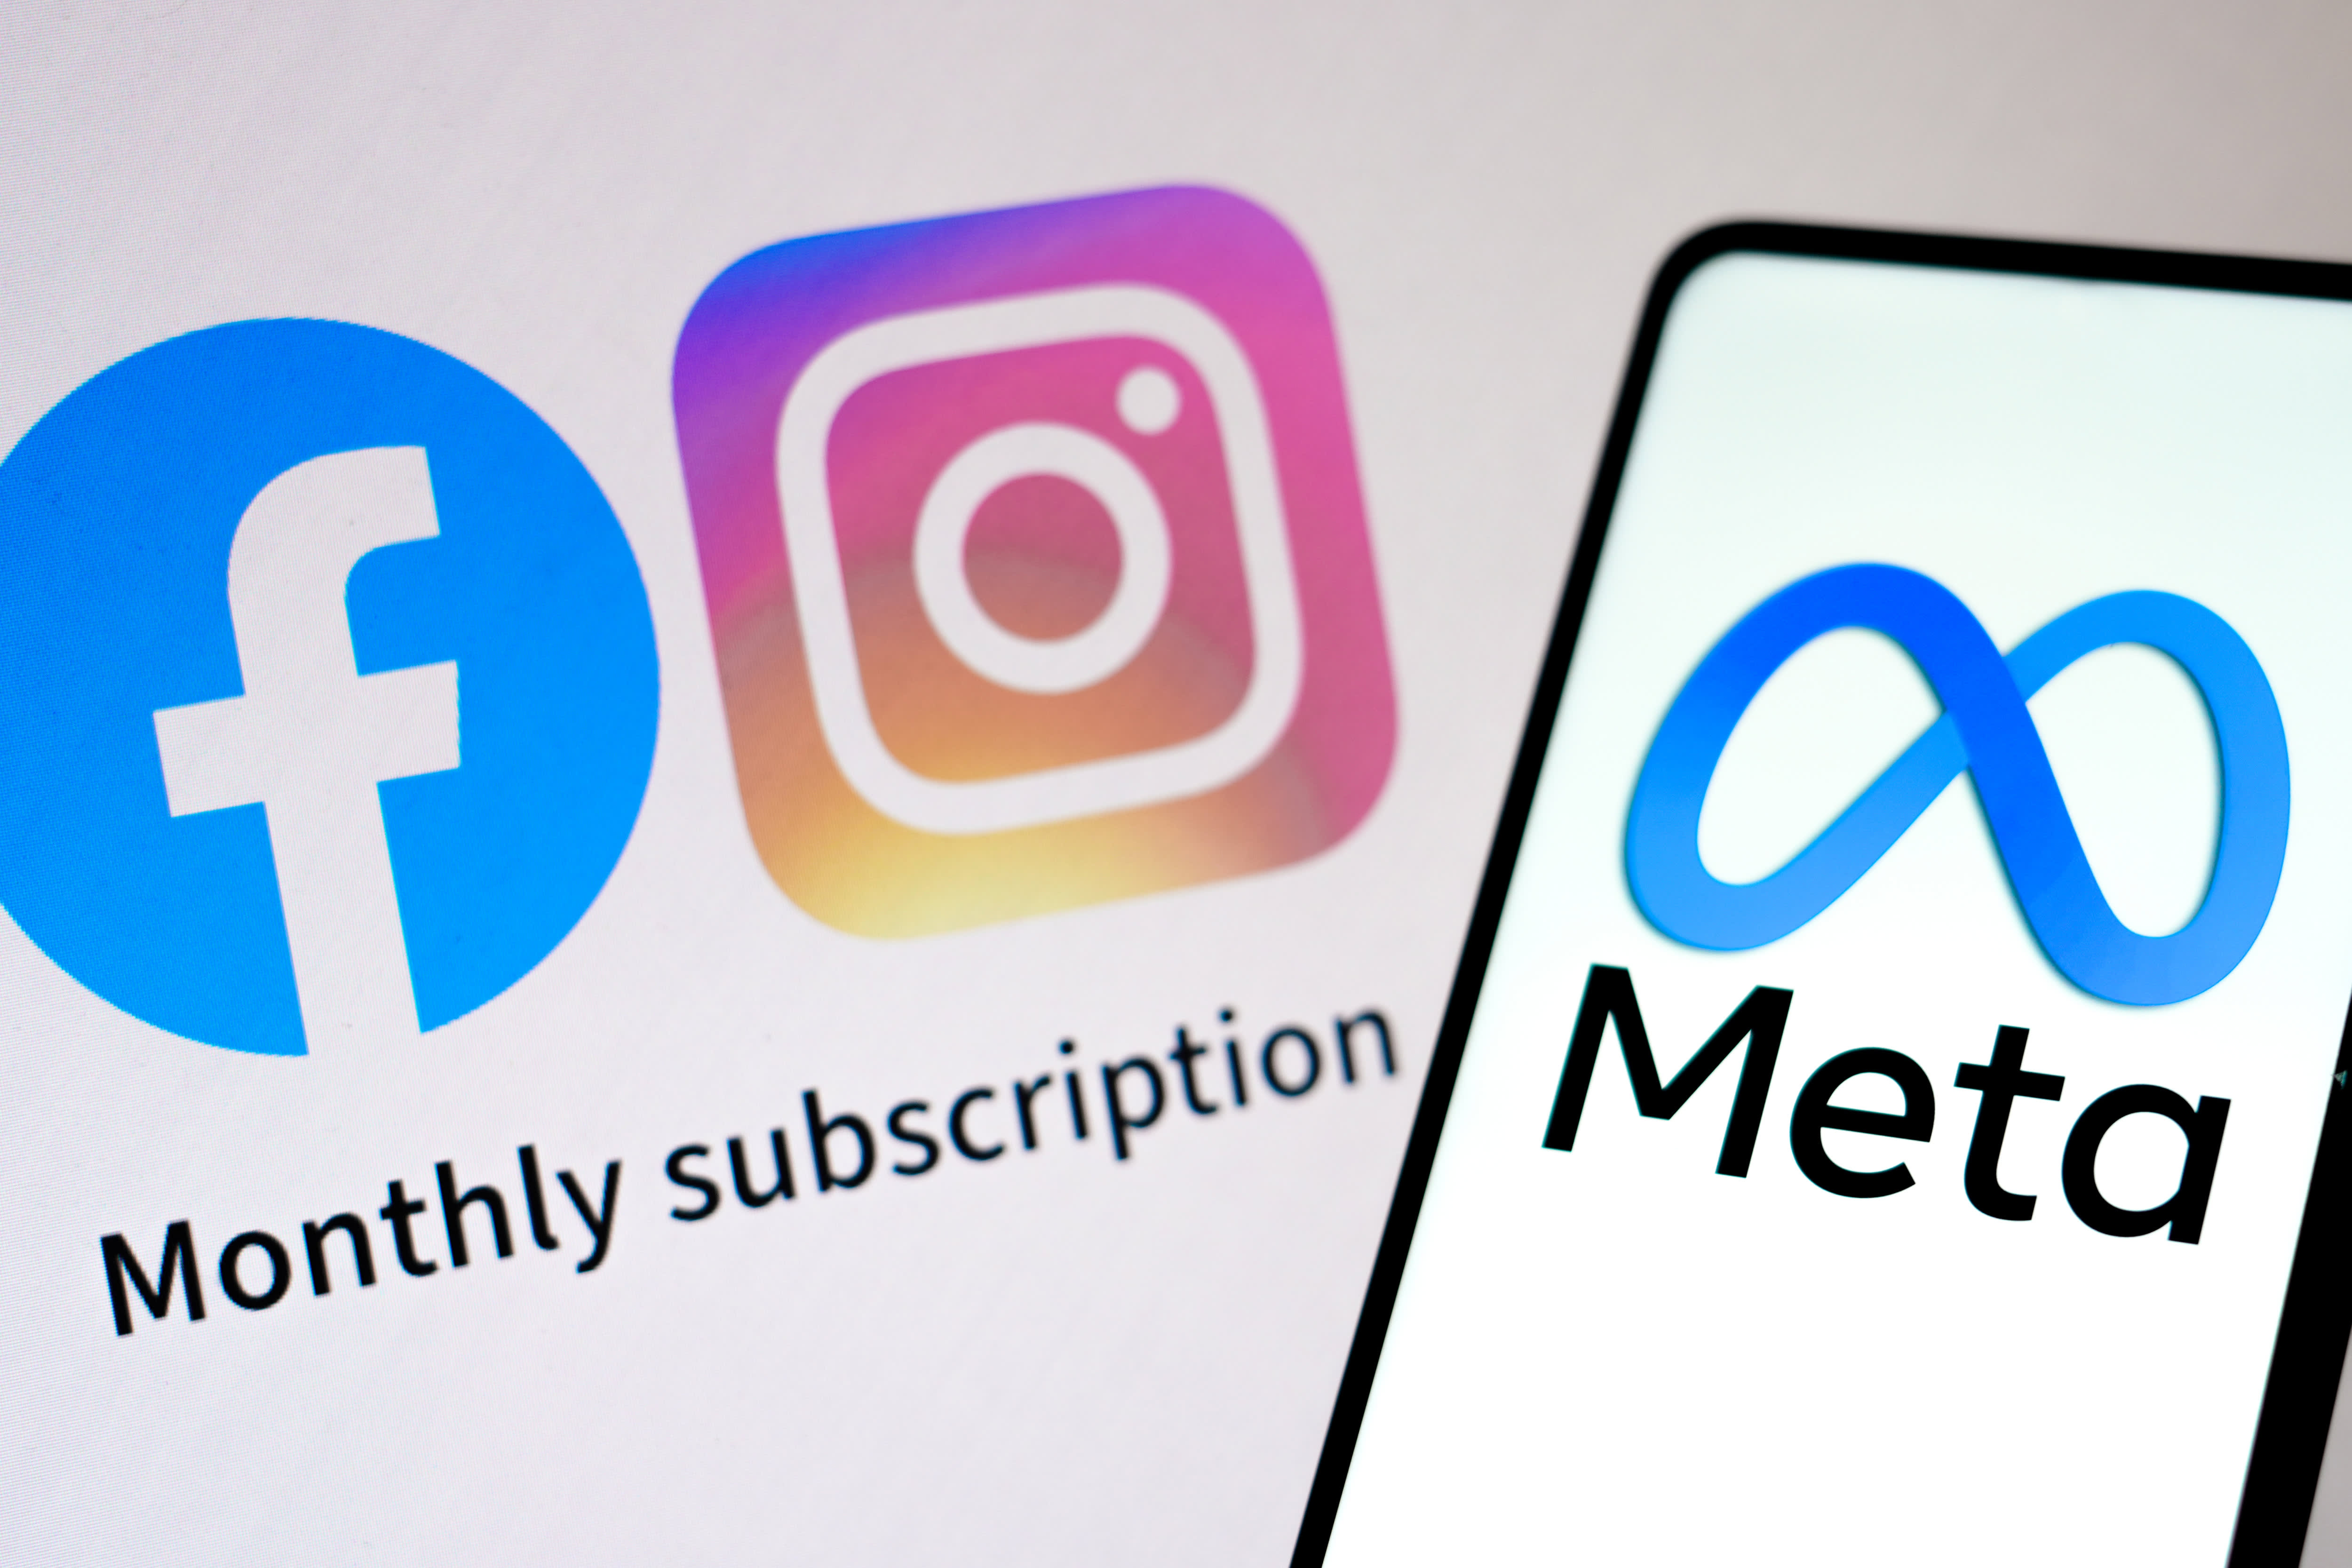 What a potential TikTok ban means for clubs with metaplatforms